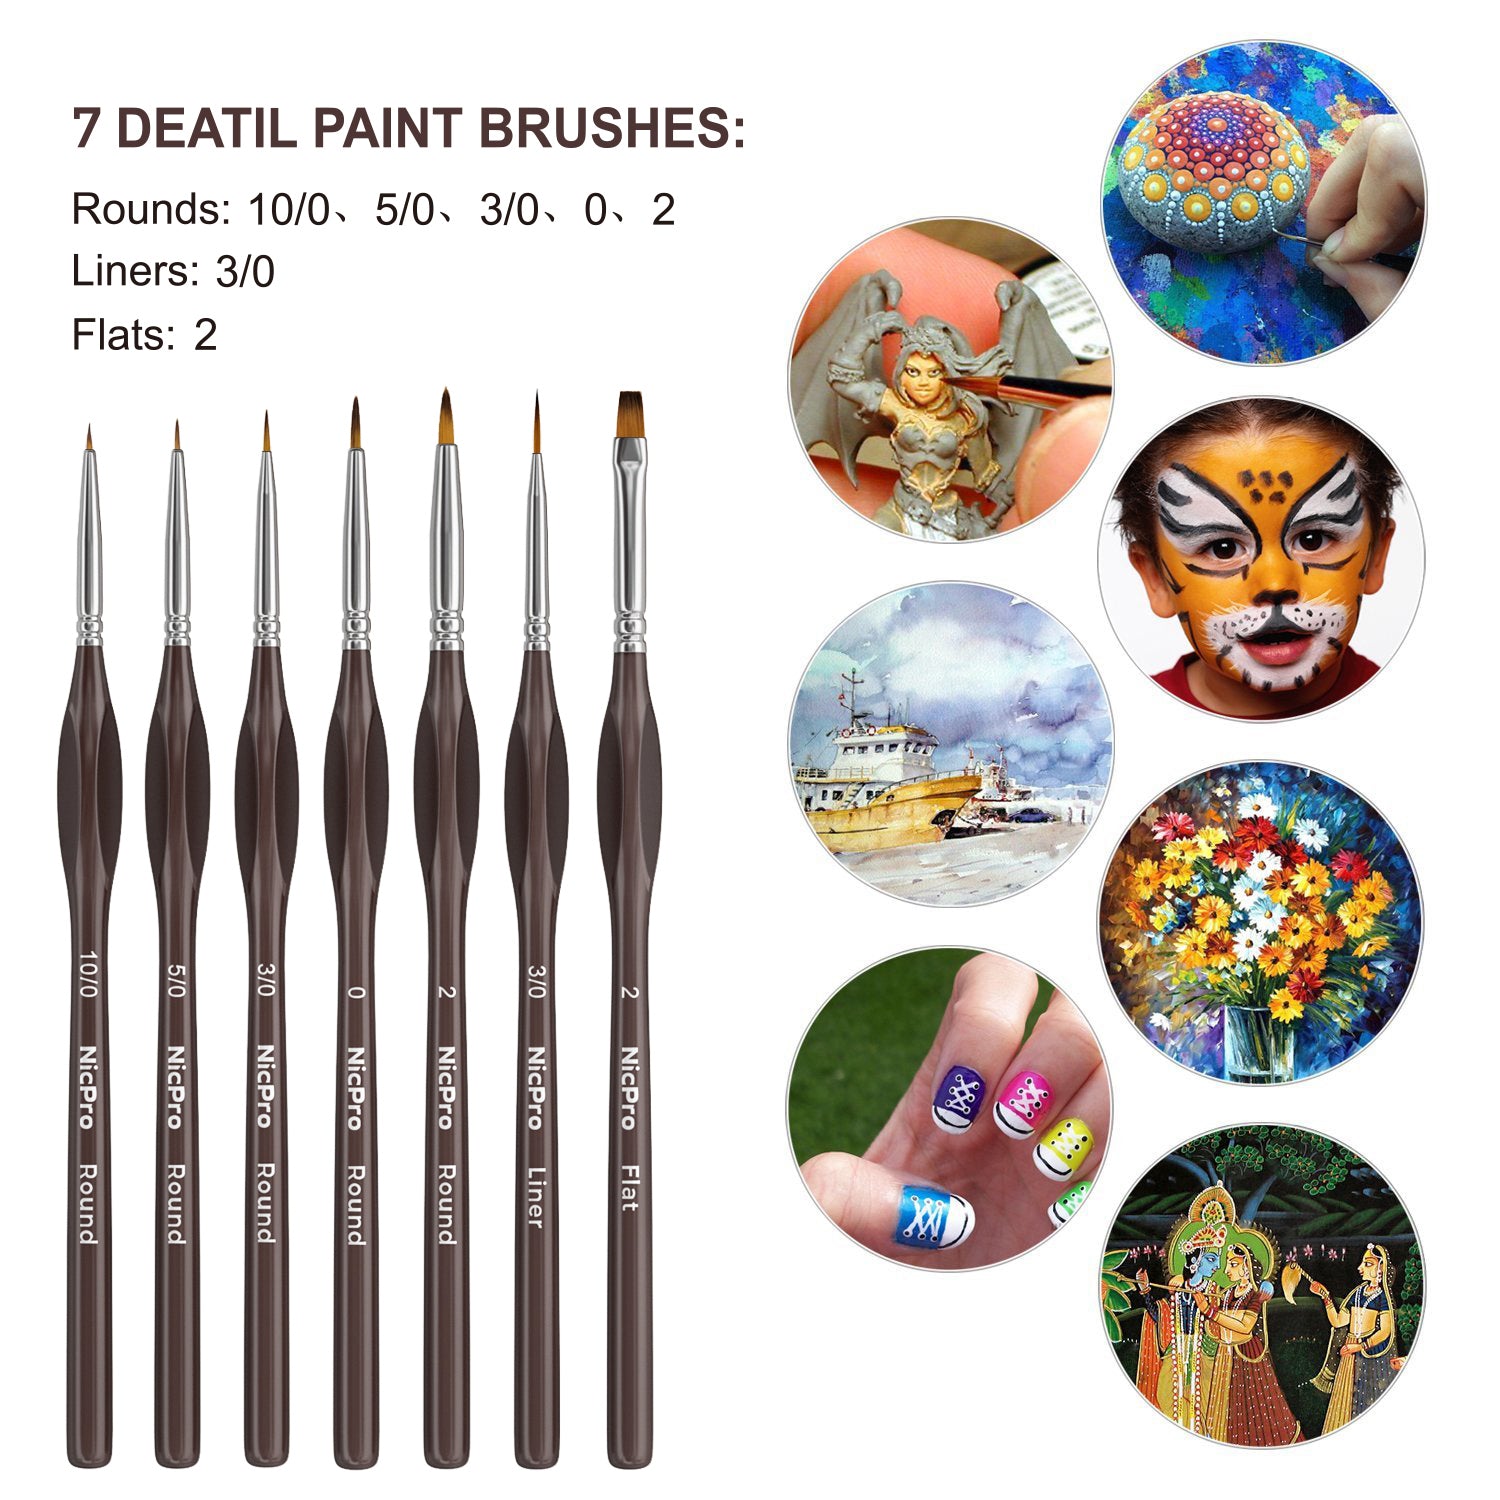 Creative Mark Disposable Detail Brushes - Disposable Detail Brushes for One-Time Use Painting, Commissions, Teachers, Classrooms, & More! - Set of 10